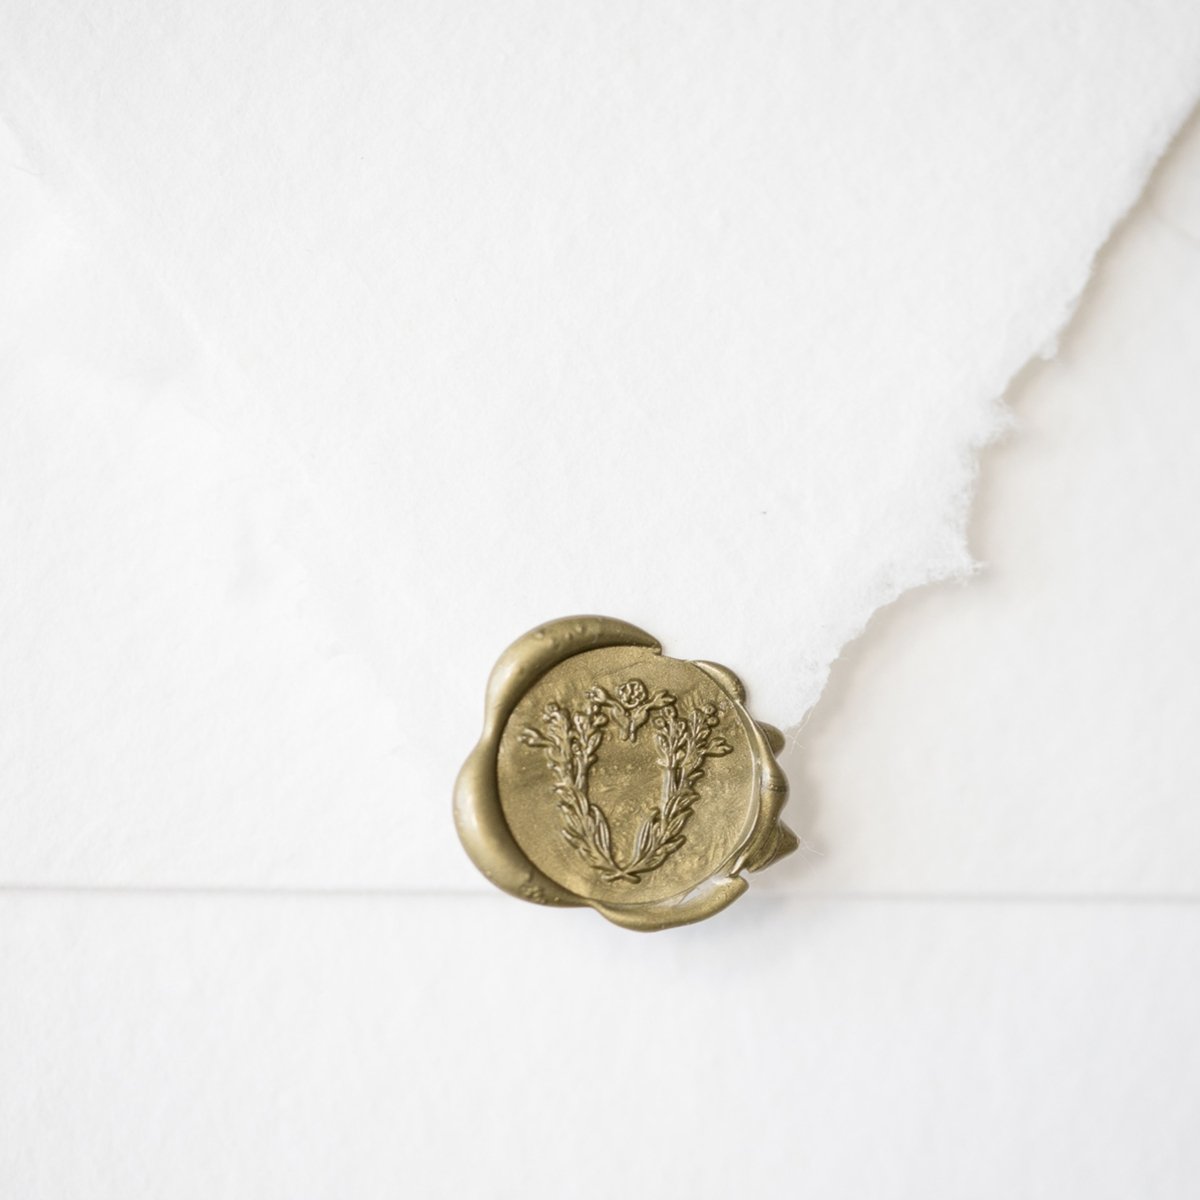 Wax seal to personalize wedding invitations